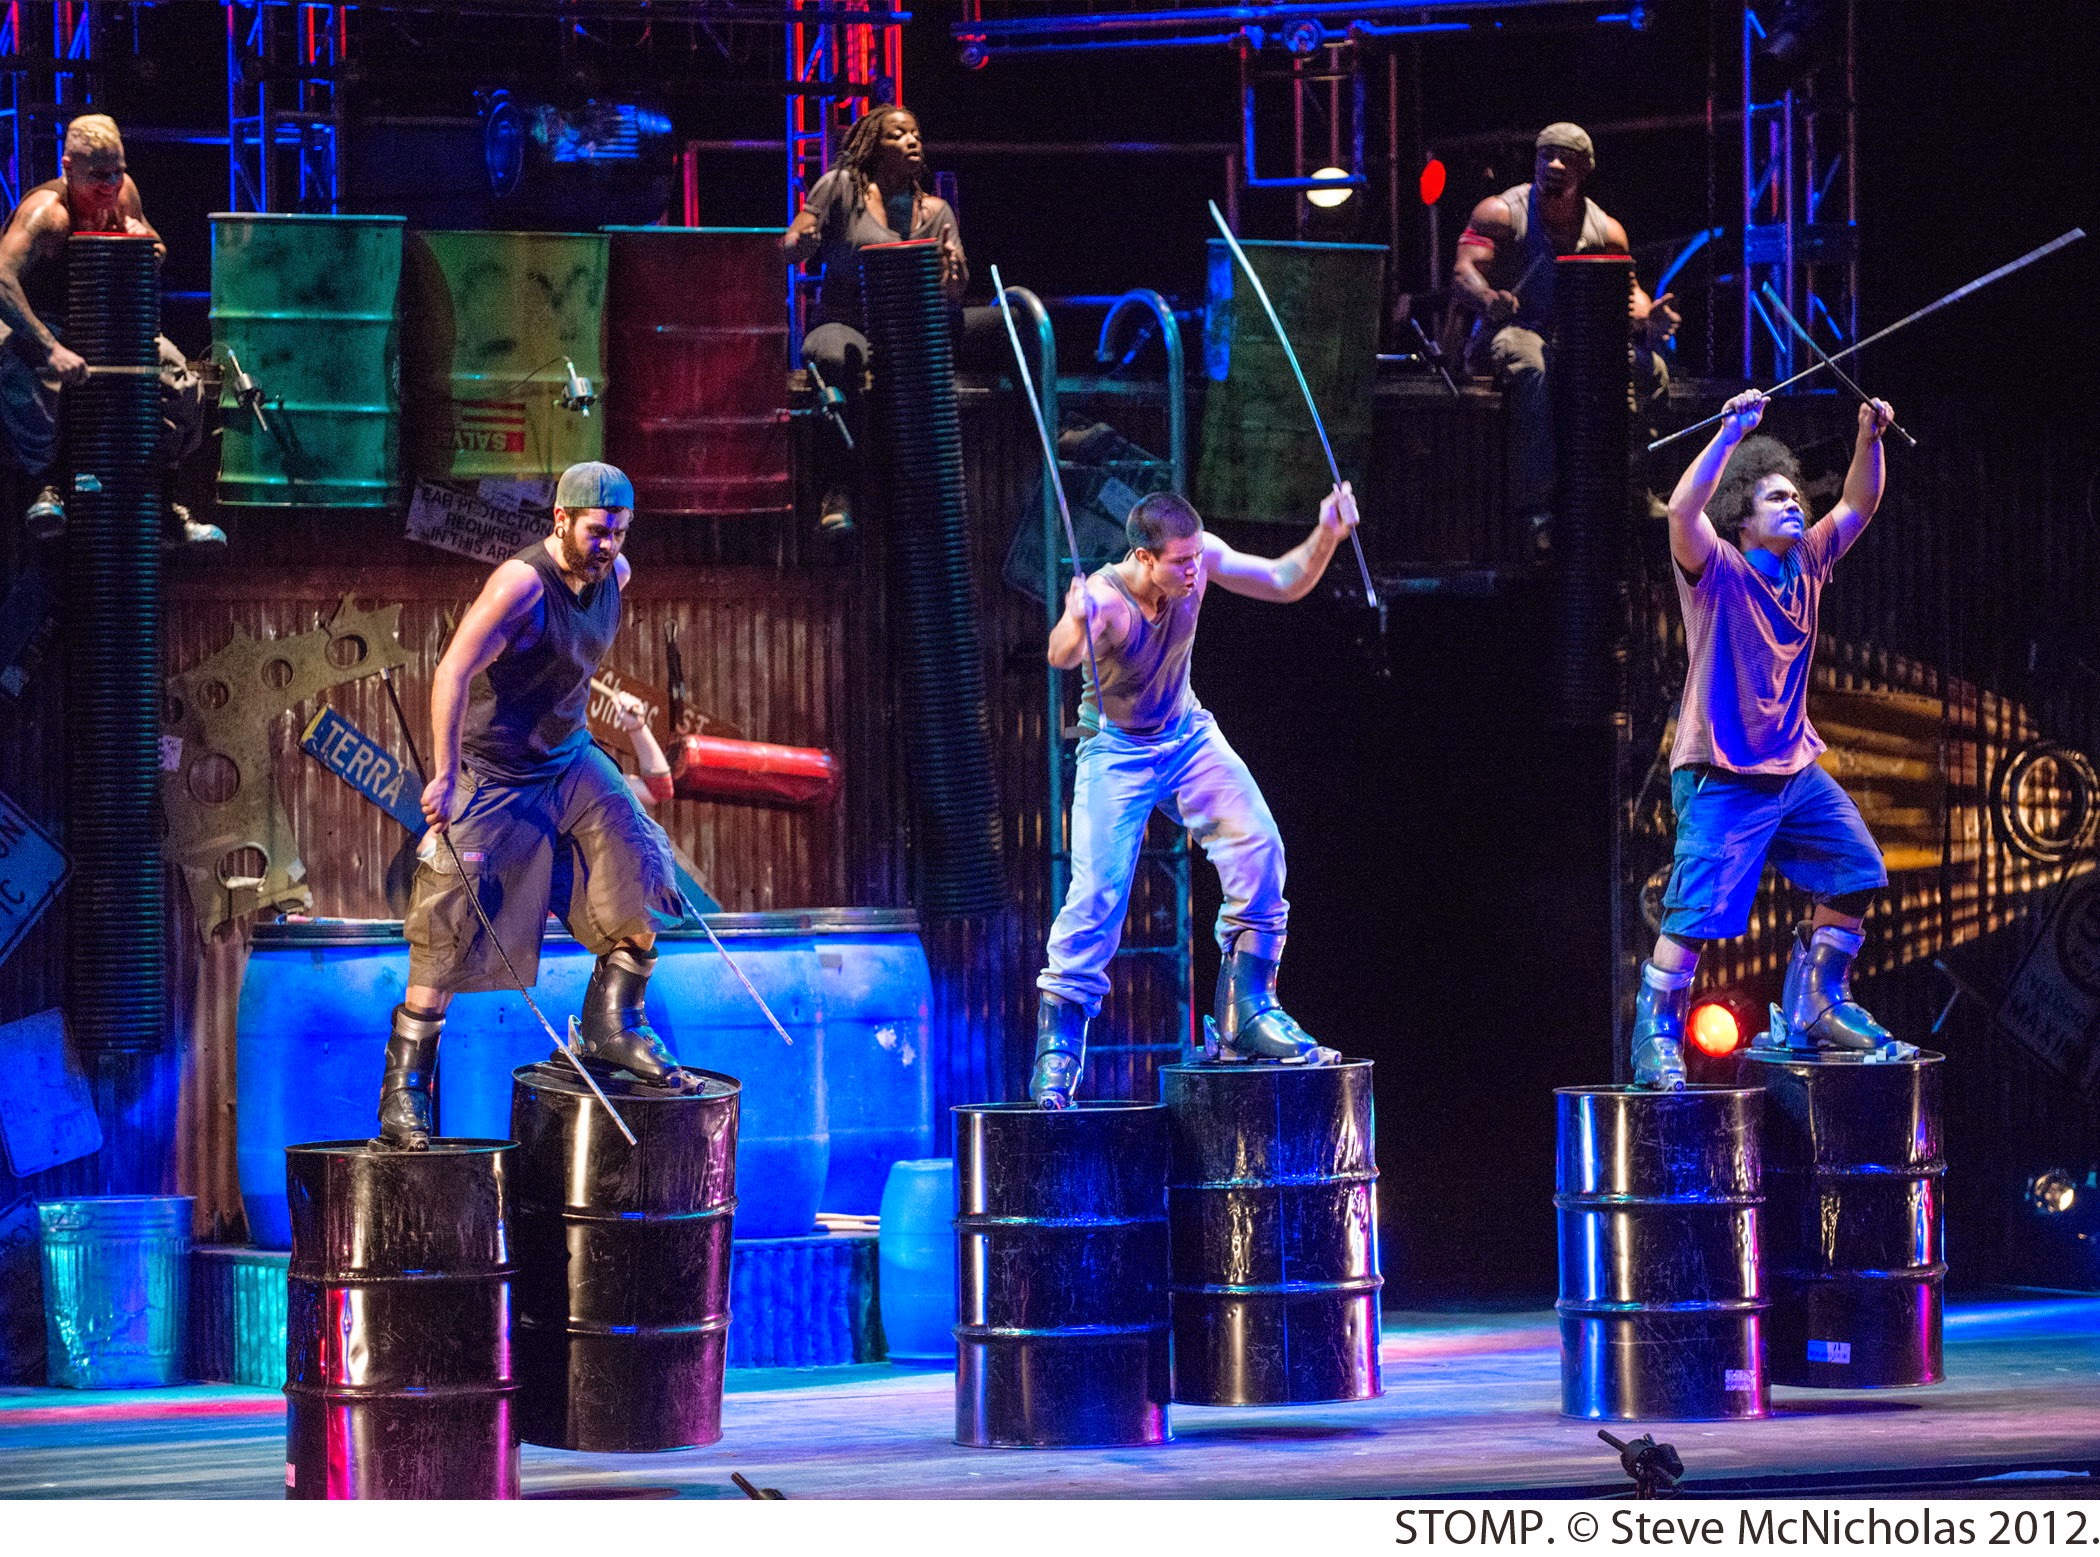 Broadway In Chicago Announces The Return of STOMP, Limited One-Week Engagement January 20-25, 2015 at the Bank of America Theatre 3